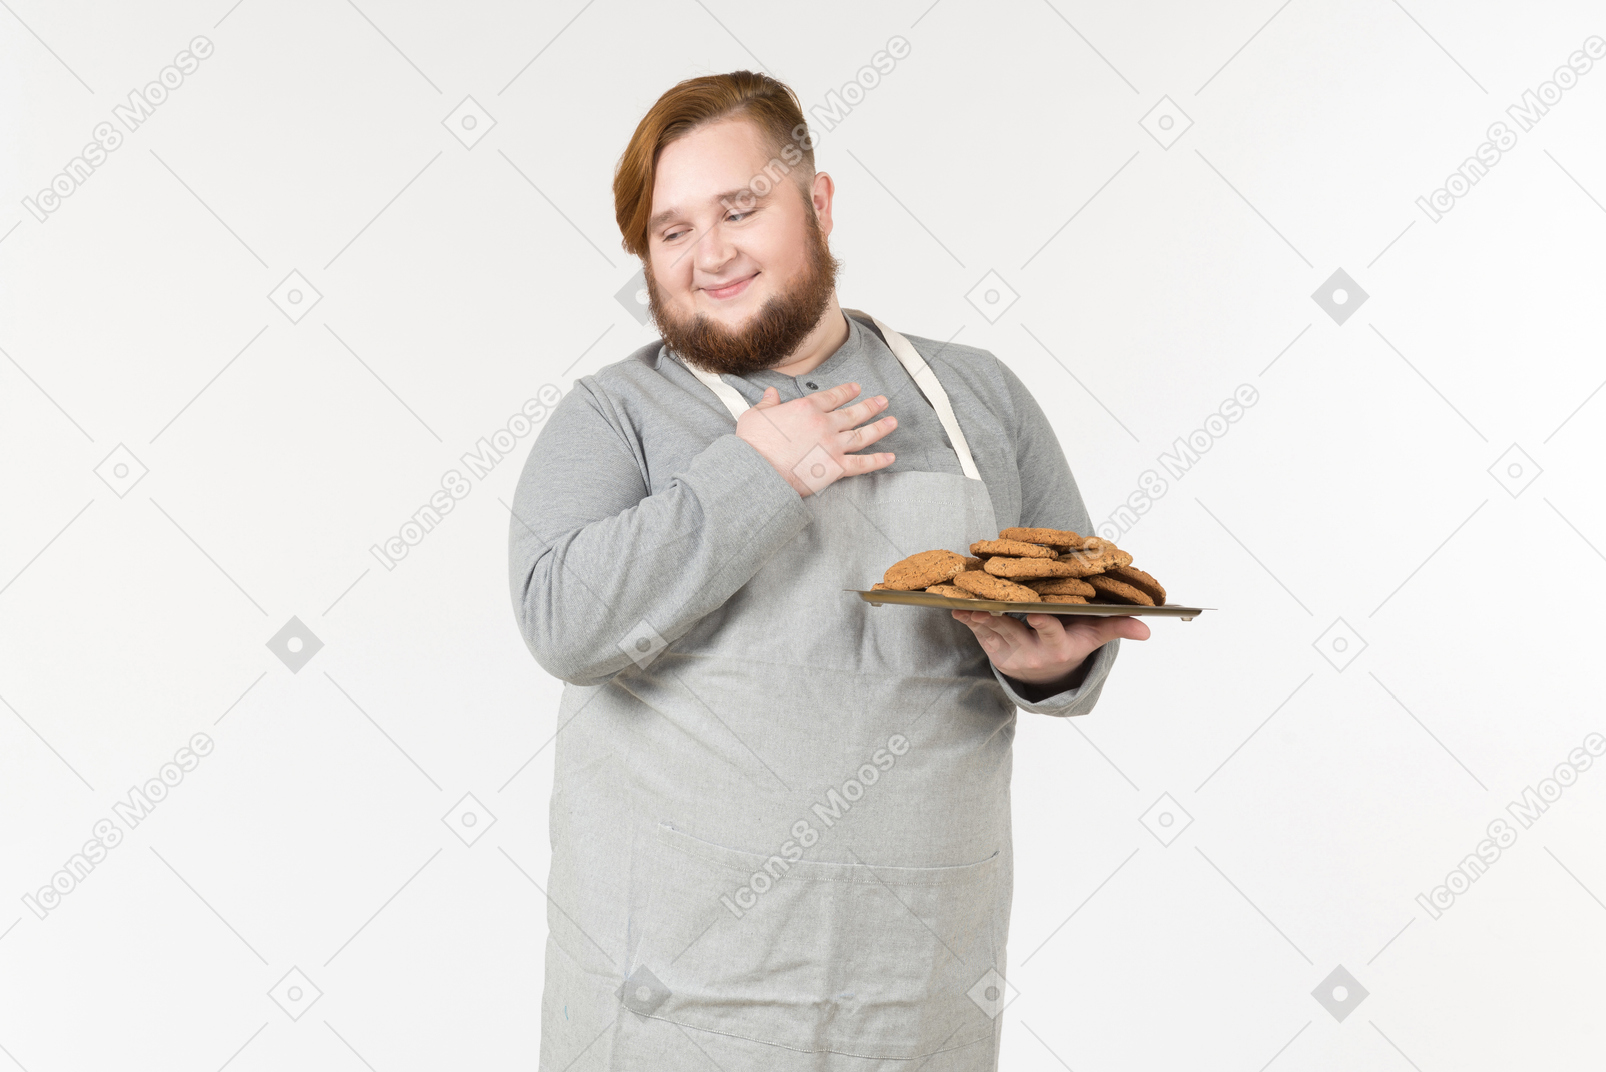 A pleased fat man holding a plate of cookies